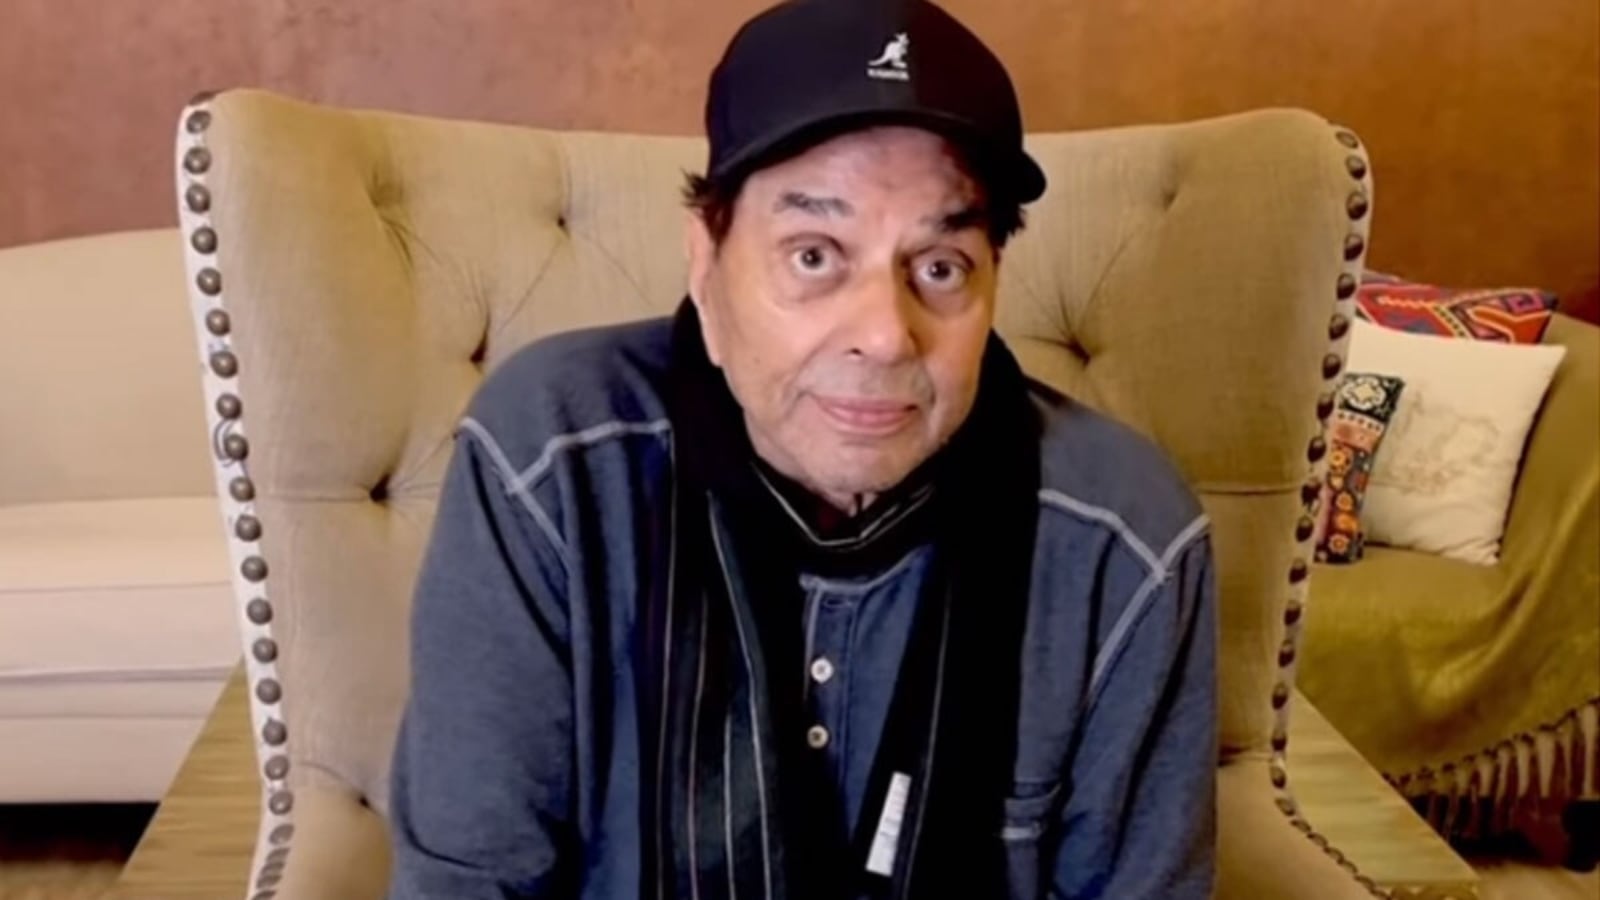 Dharmendra shares the lesson he has learnt after being discharged from hospital: ‘Now I’ll be very careful’